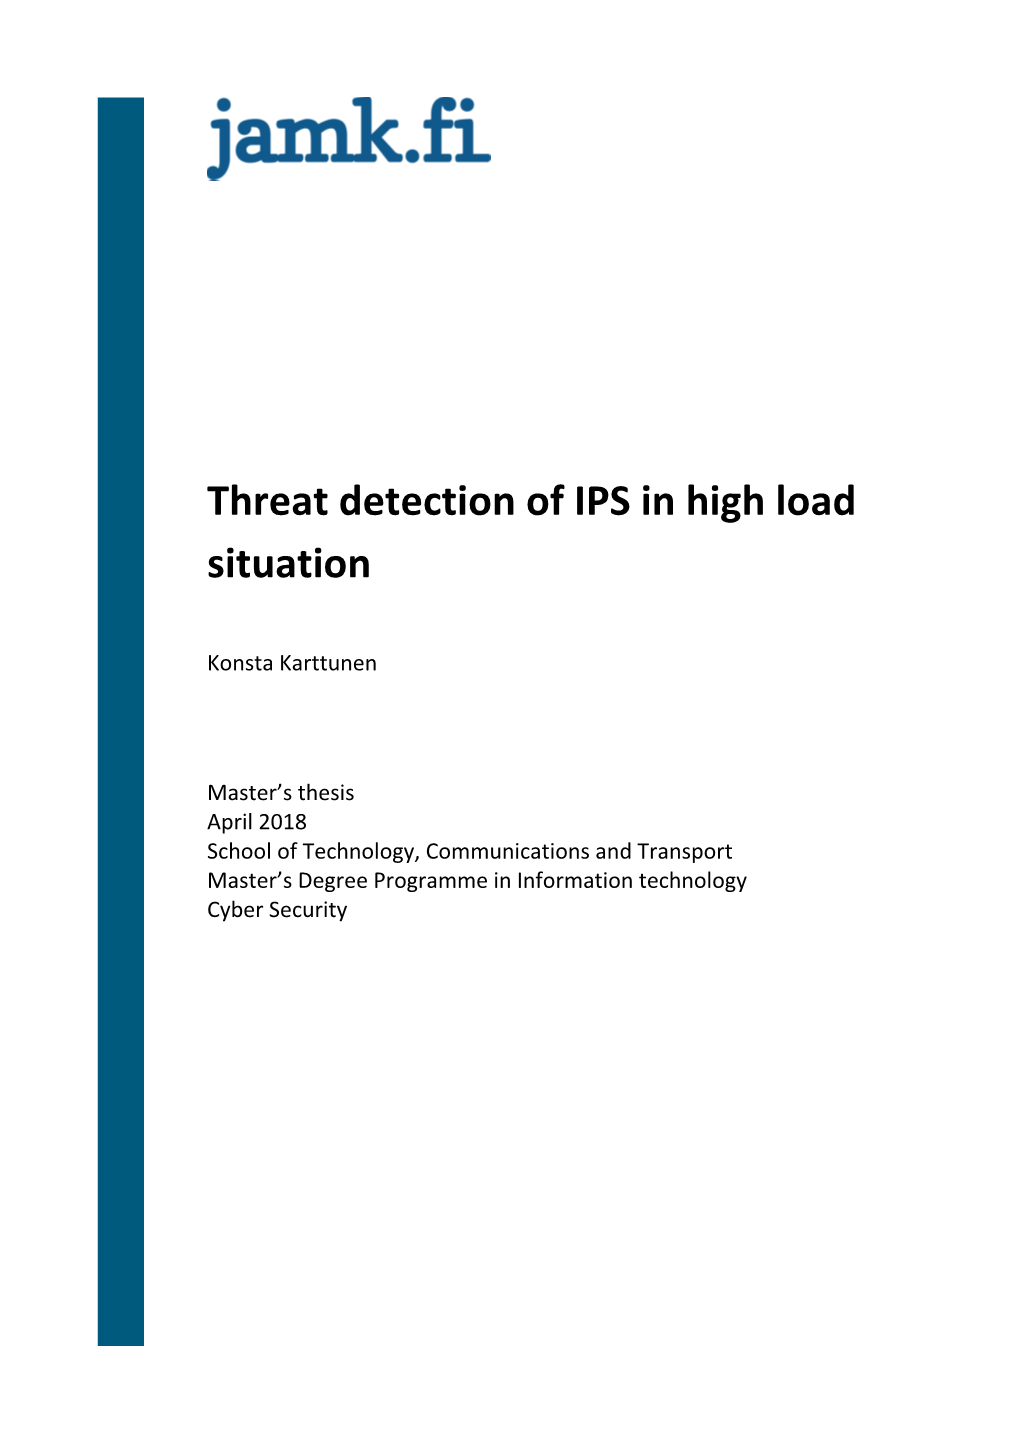 Threat Detection of IPS in High Load Situation